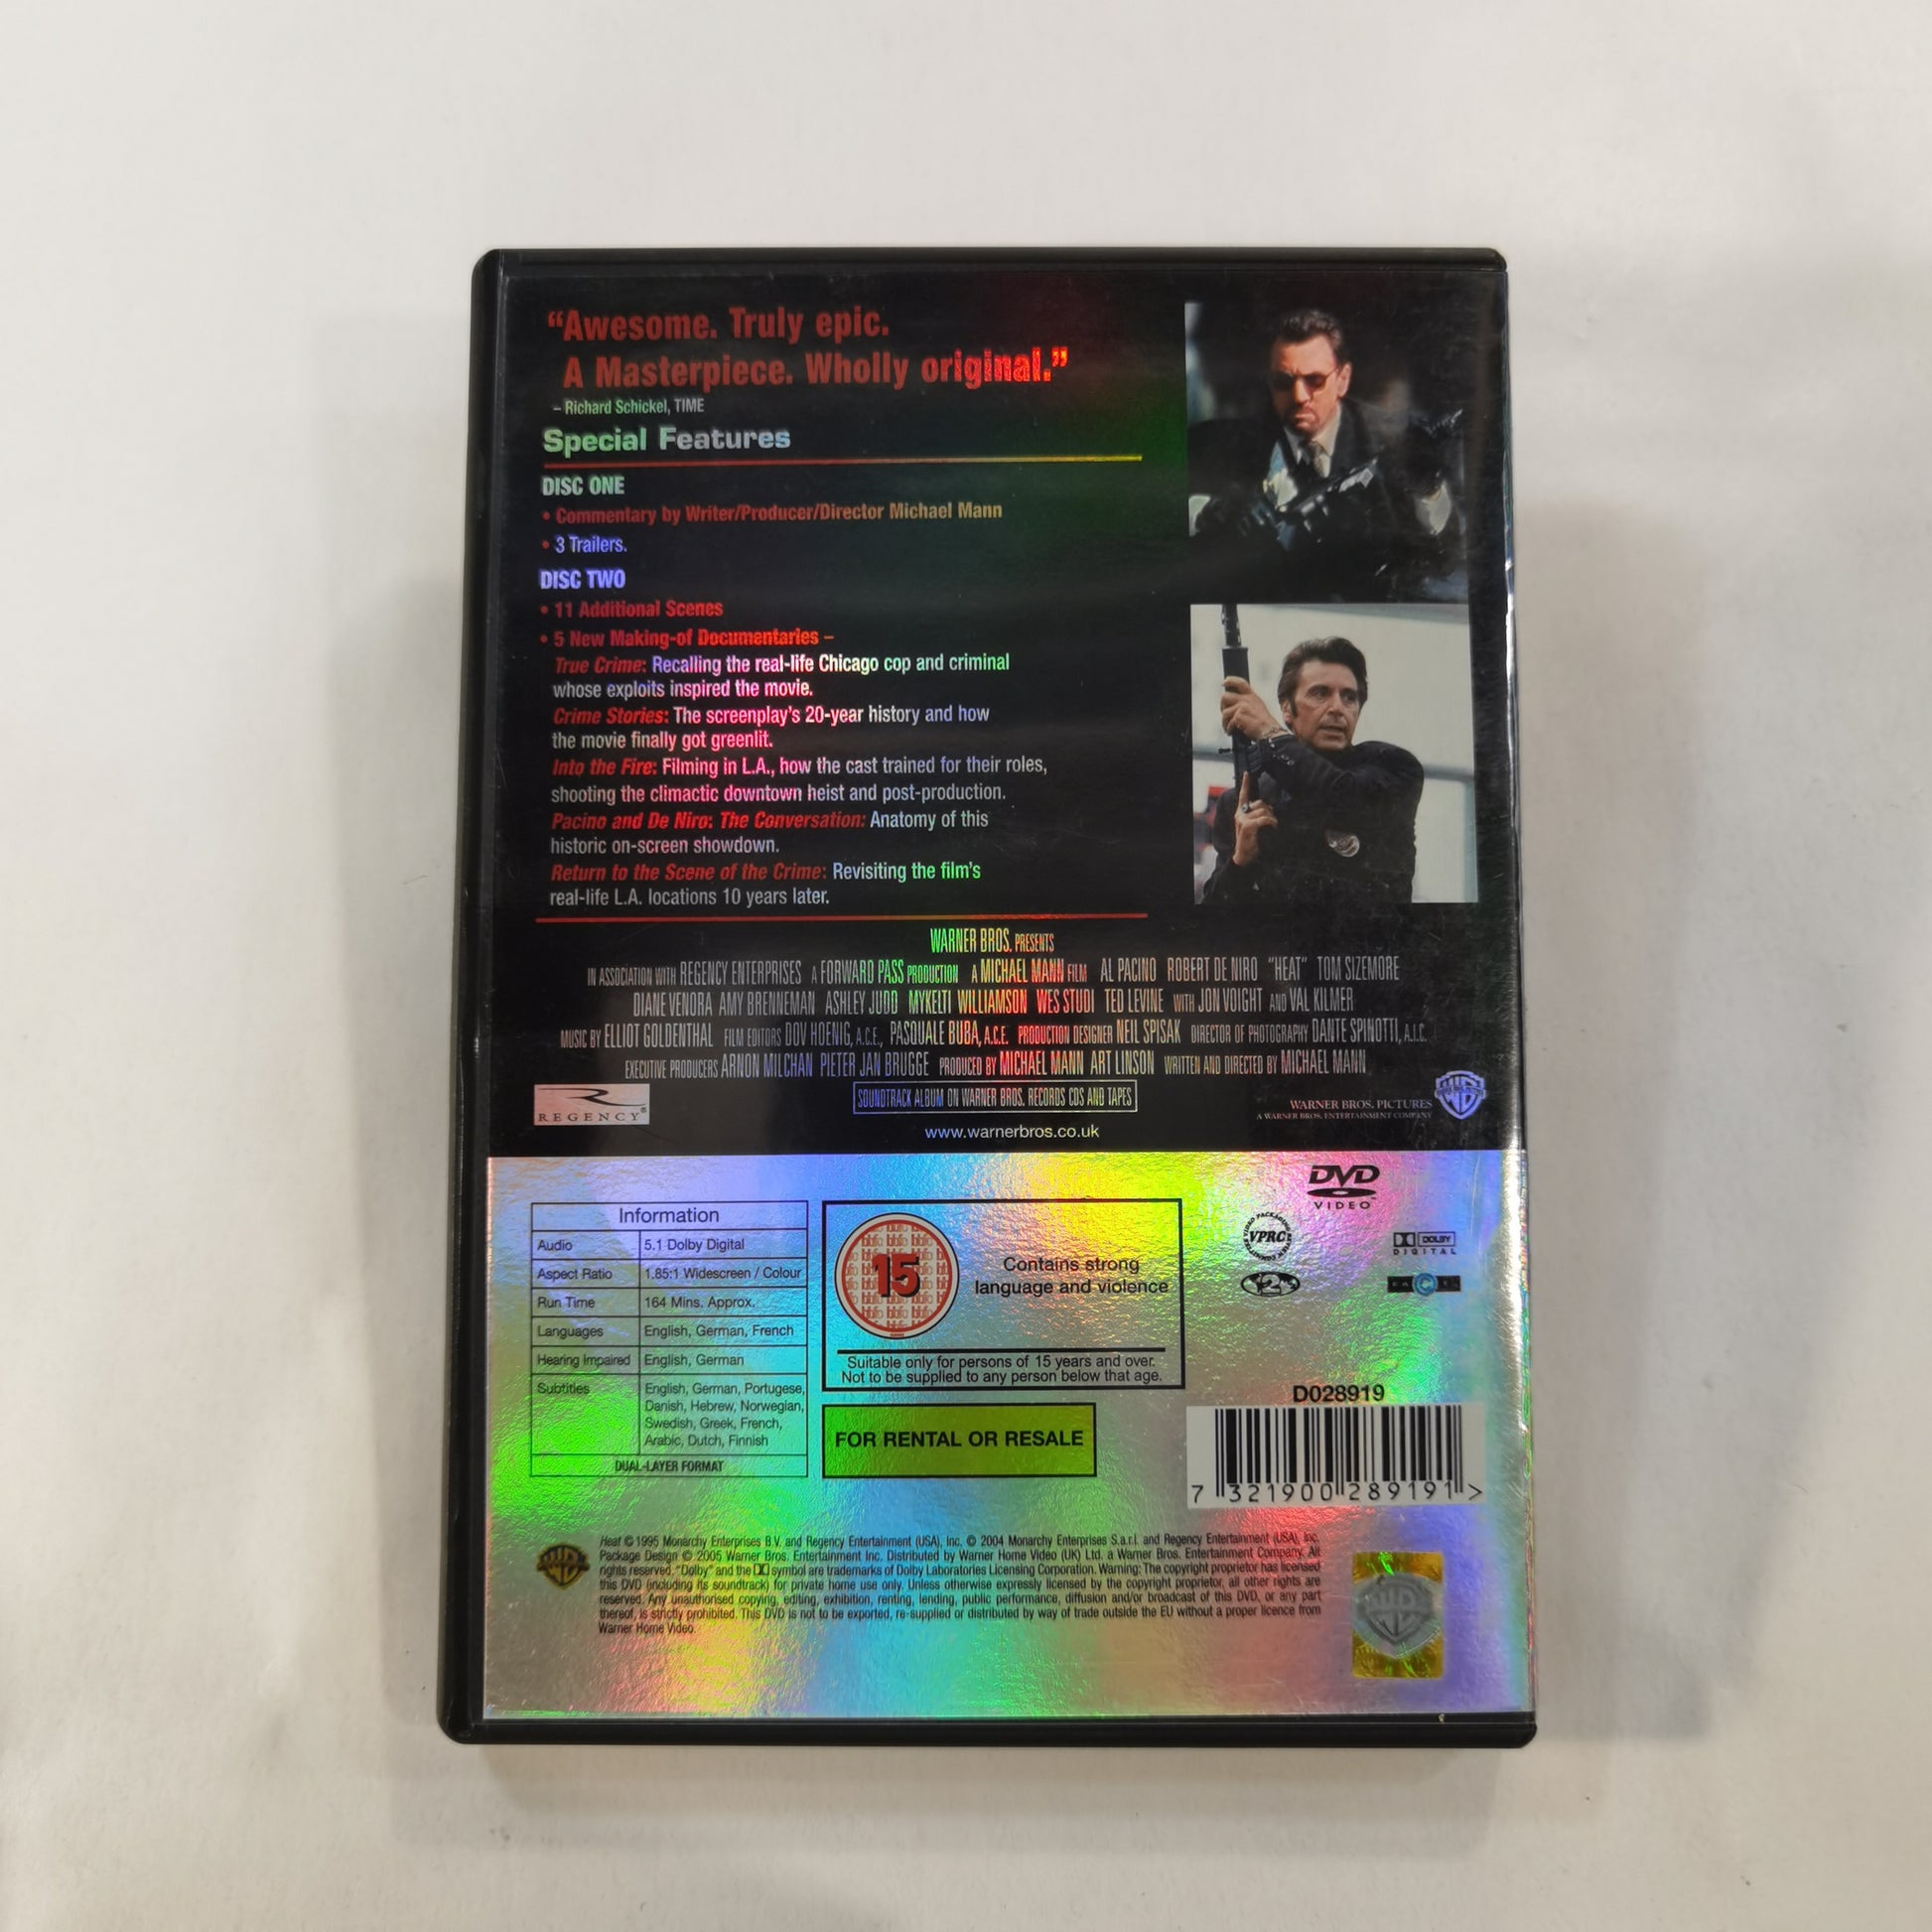 Heat (1995) - DVD UK 2005 2-Disc Special Edition UK ( Cover Reflective )